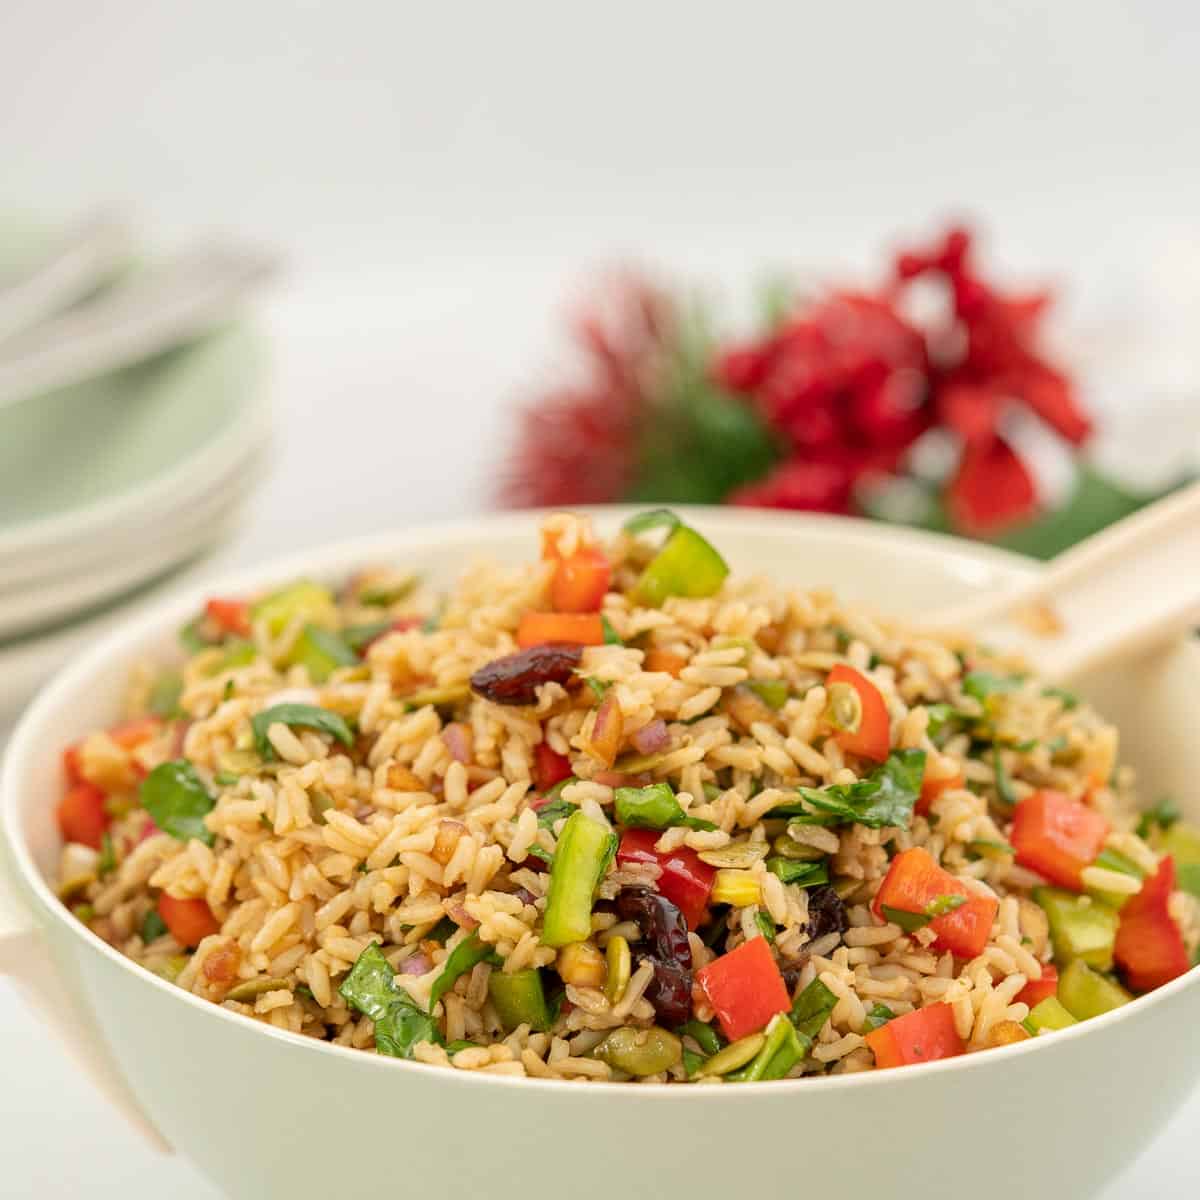 Large bowl of brown rice salad with red and green diced capsicum.